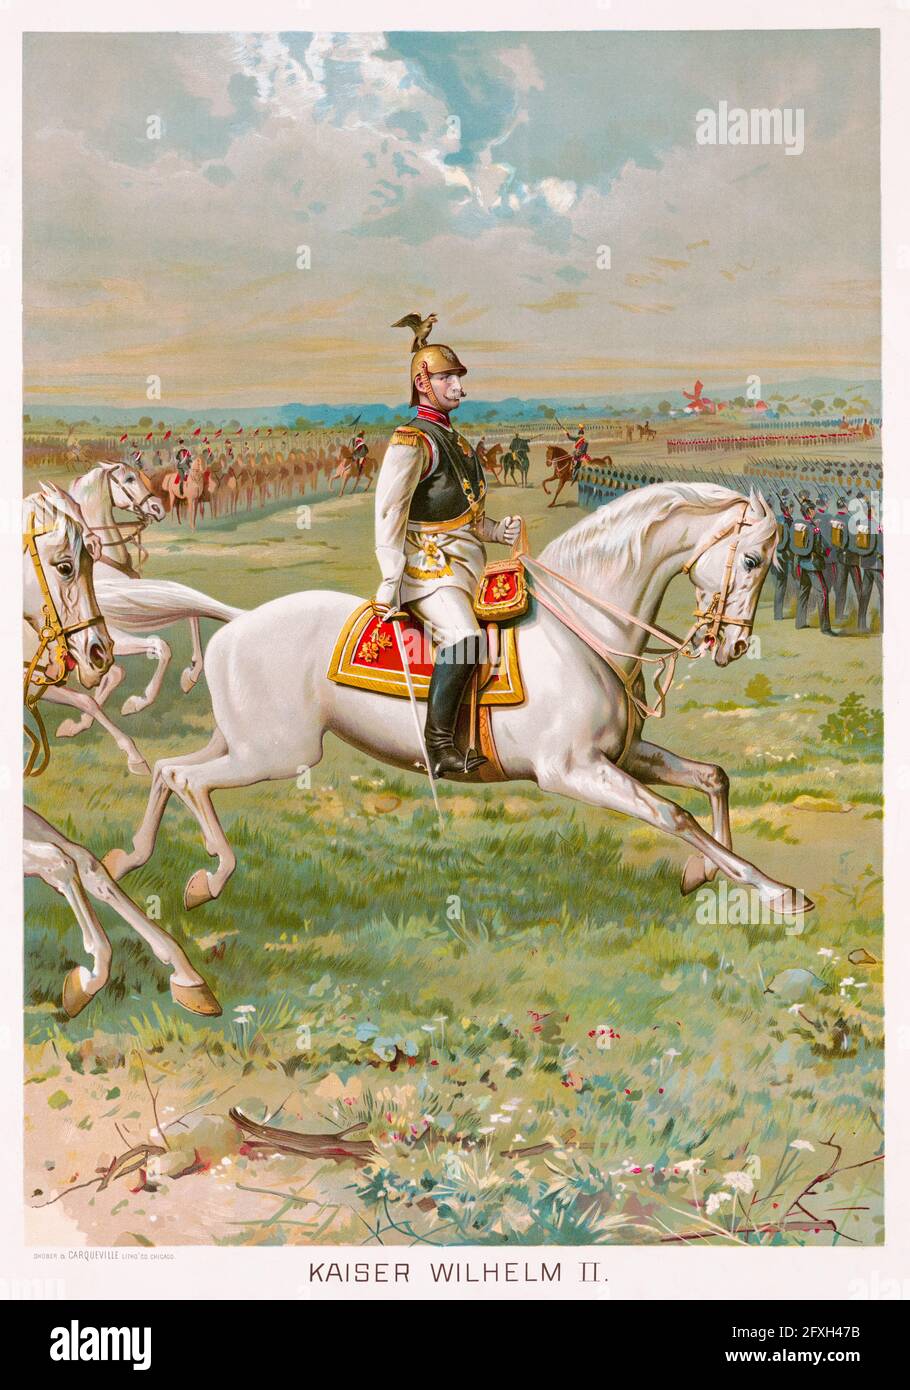 Wilhelm II (1859-1941) (William II) in Military Uniform on horseback, the last German Emperor (Kaiser) and King of Prussia (1888-1918), equestrian portrait by Shober & Carqueville Litho, circa 1891 Stock Photo